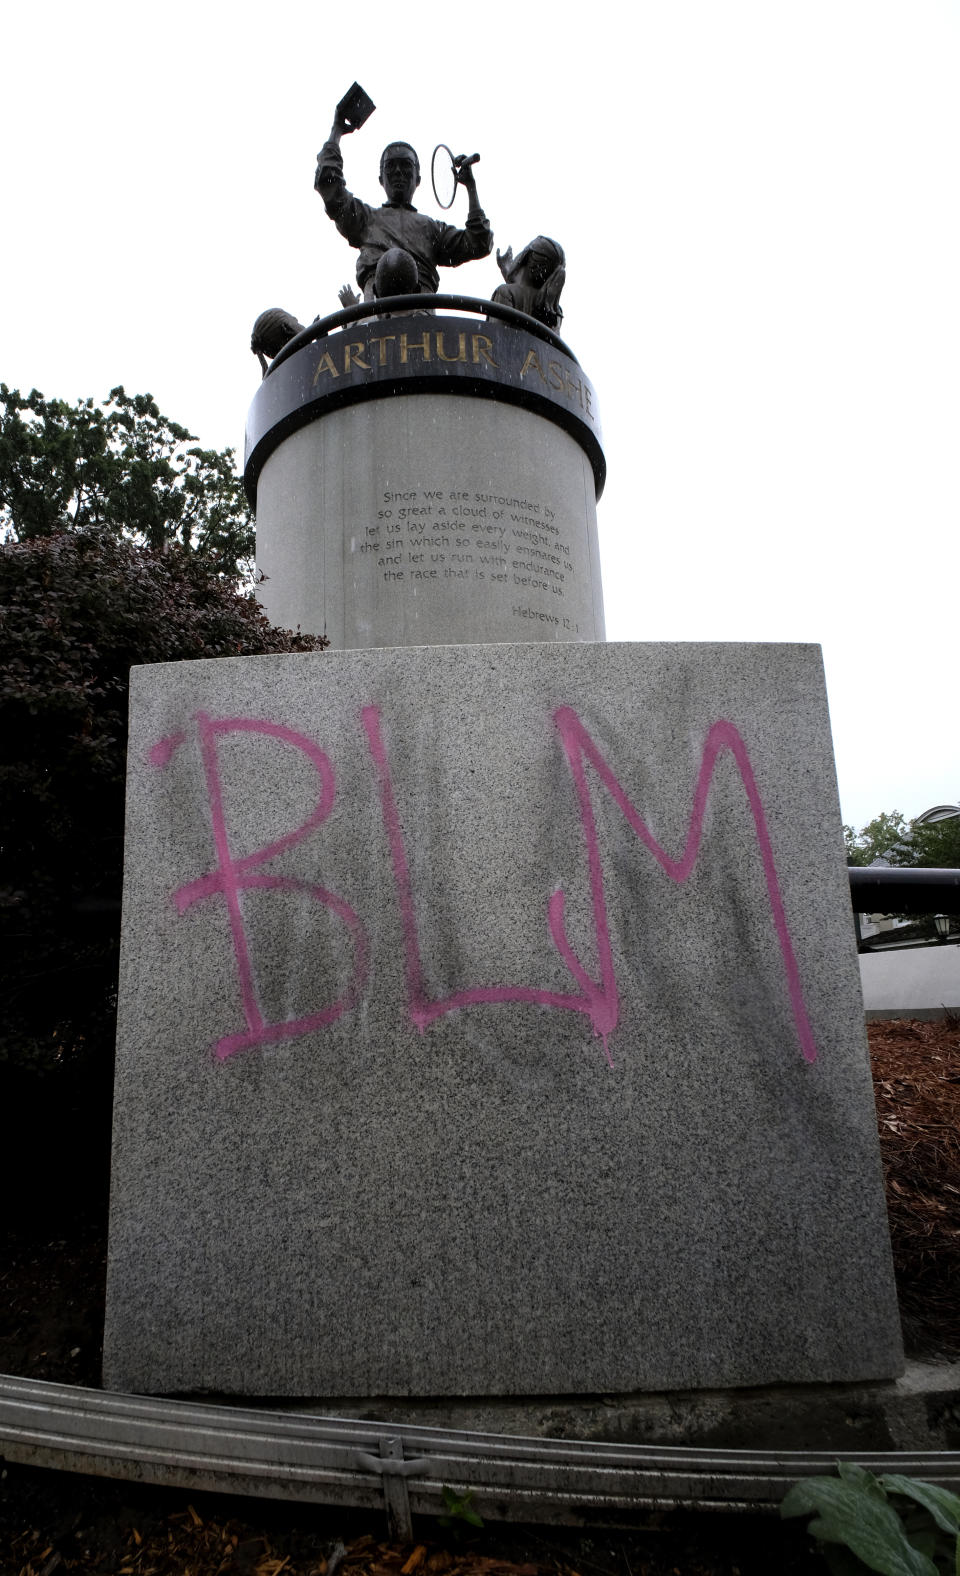 Paint covers the base of the Arthur Ashe Monument on Wednesday, June 17, 2020 in Richmond, Va. The statue of the African American tennis legend has been vandalized with the words “White Lives Matter.” Richmond Police said they were alerted to the vandalism early Wednesday. Police say red paint on the statue itself was already being cleaned off by community members. (Bob Brown/Richmond Times-Dispatch via AP)